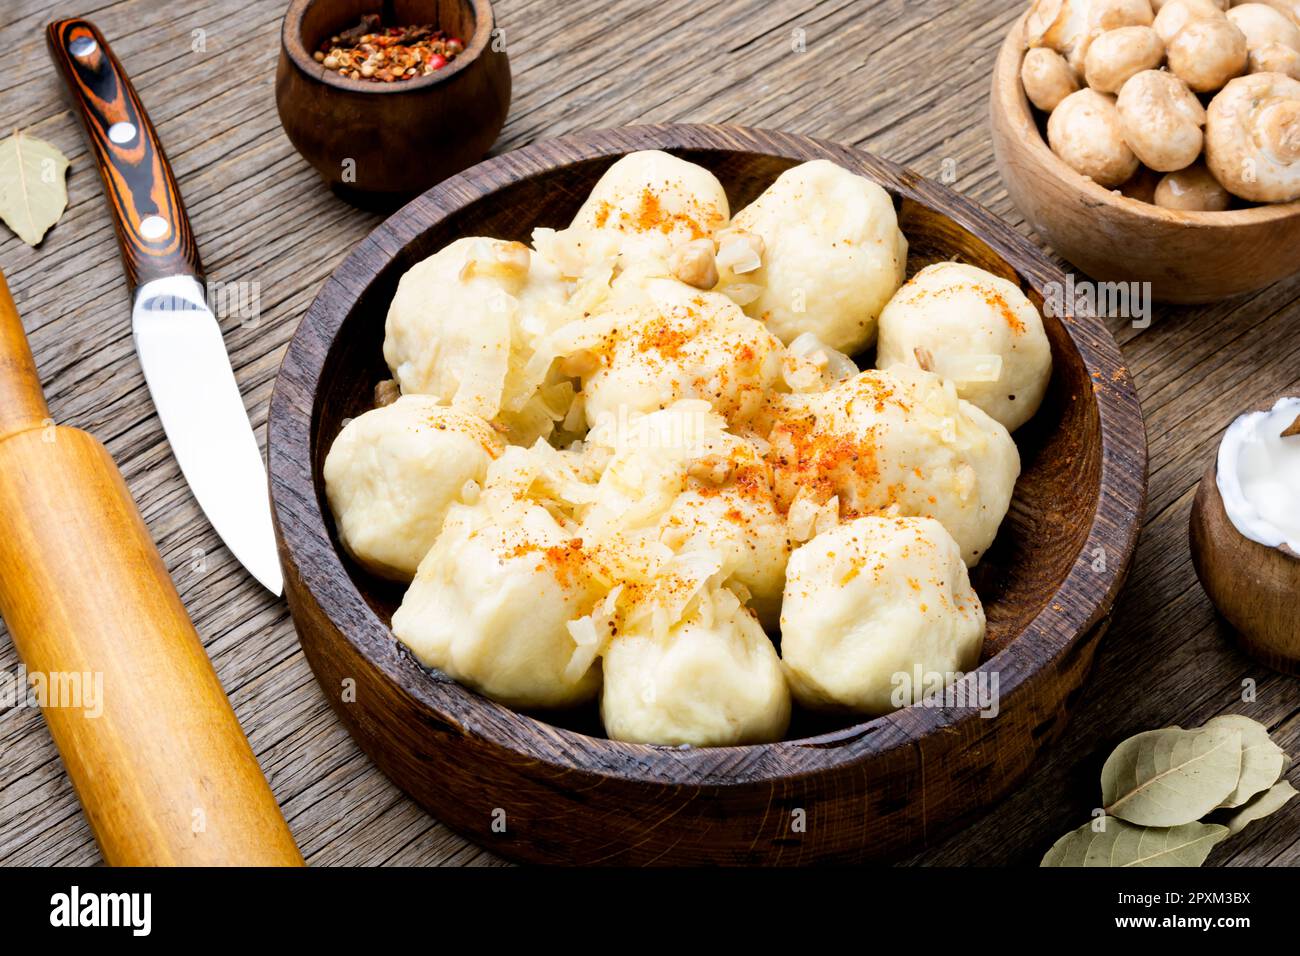 Knedliks, a boiled product made from dough, potatoes with mushroom filling on rustic the table Stock Photo